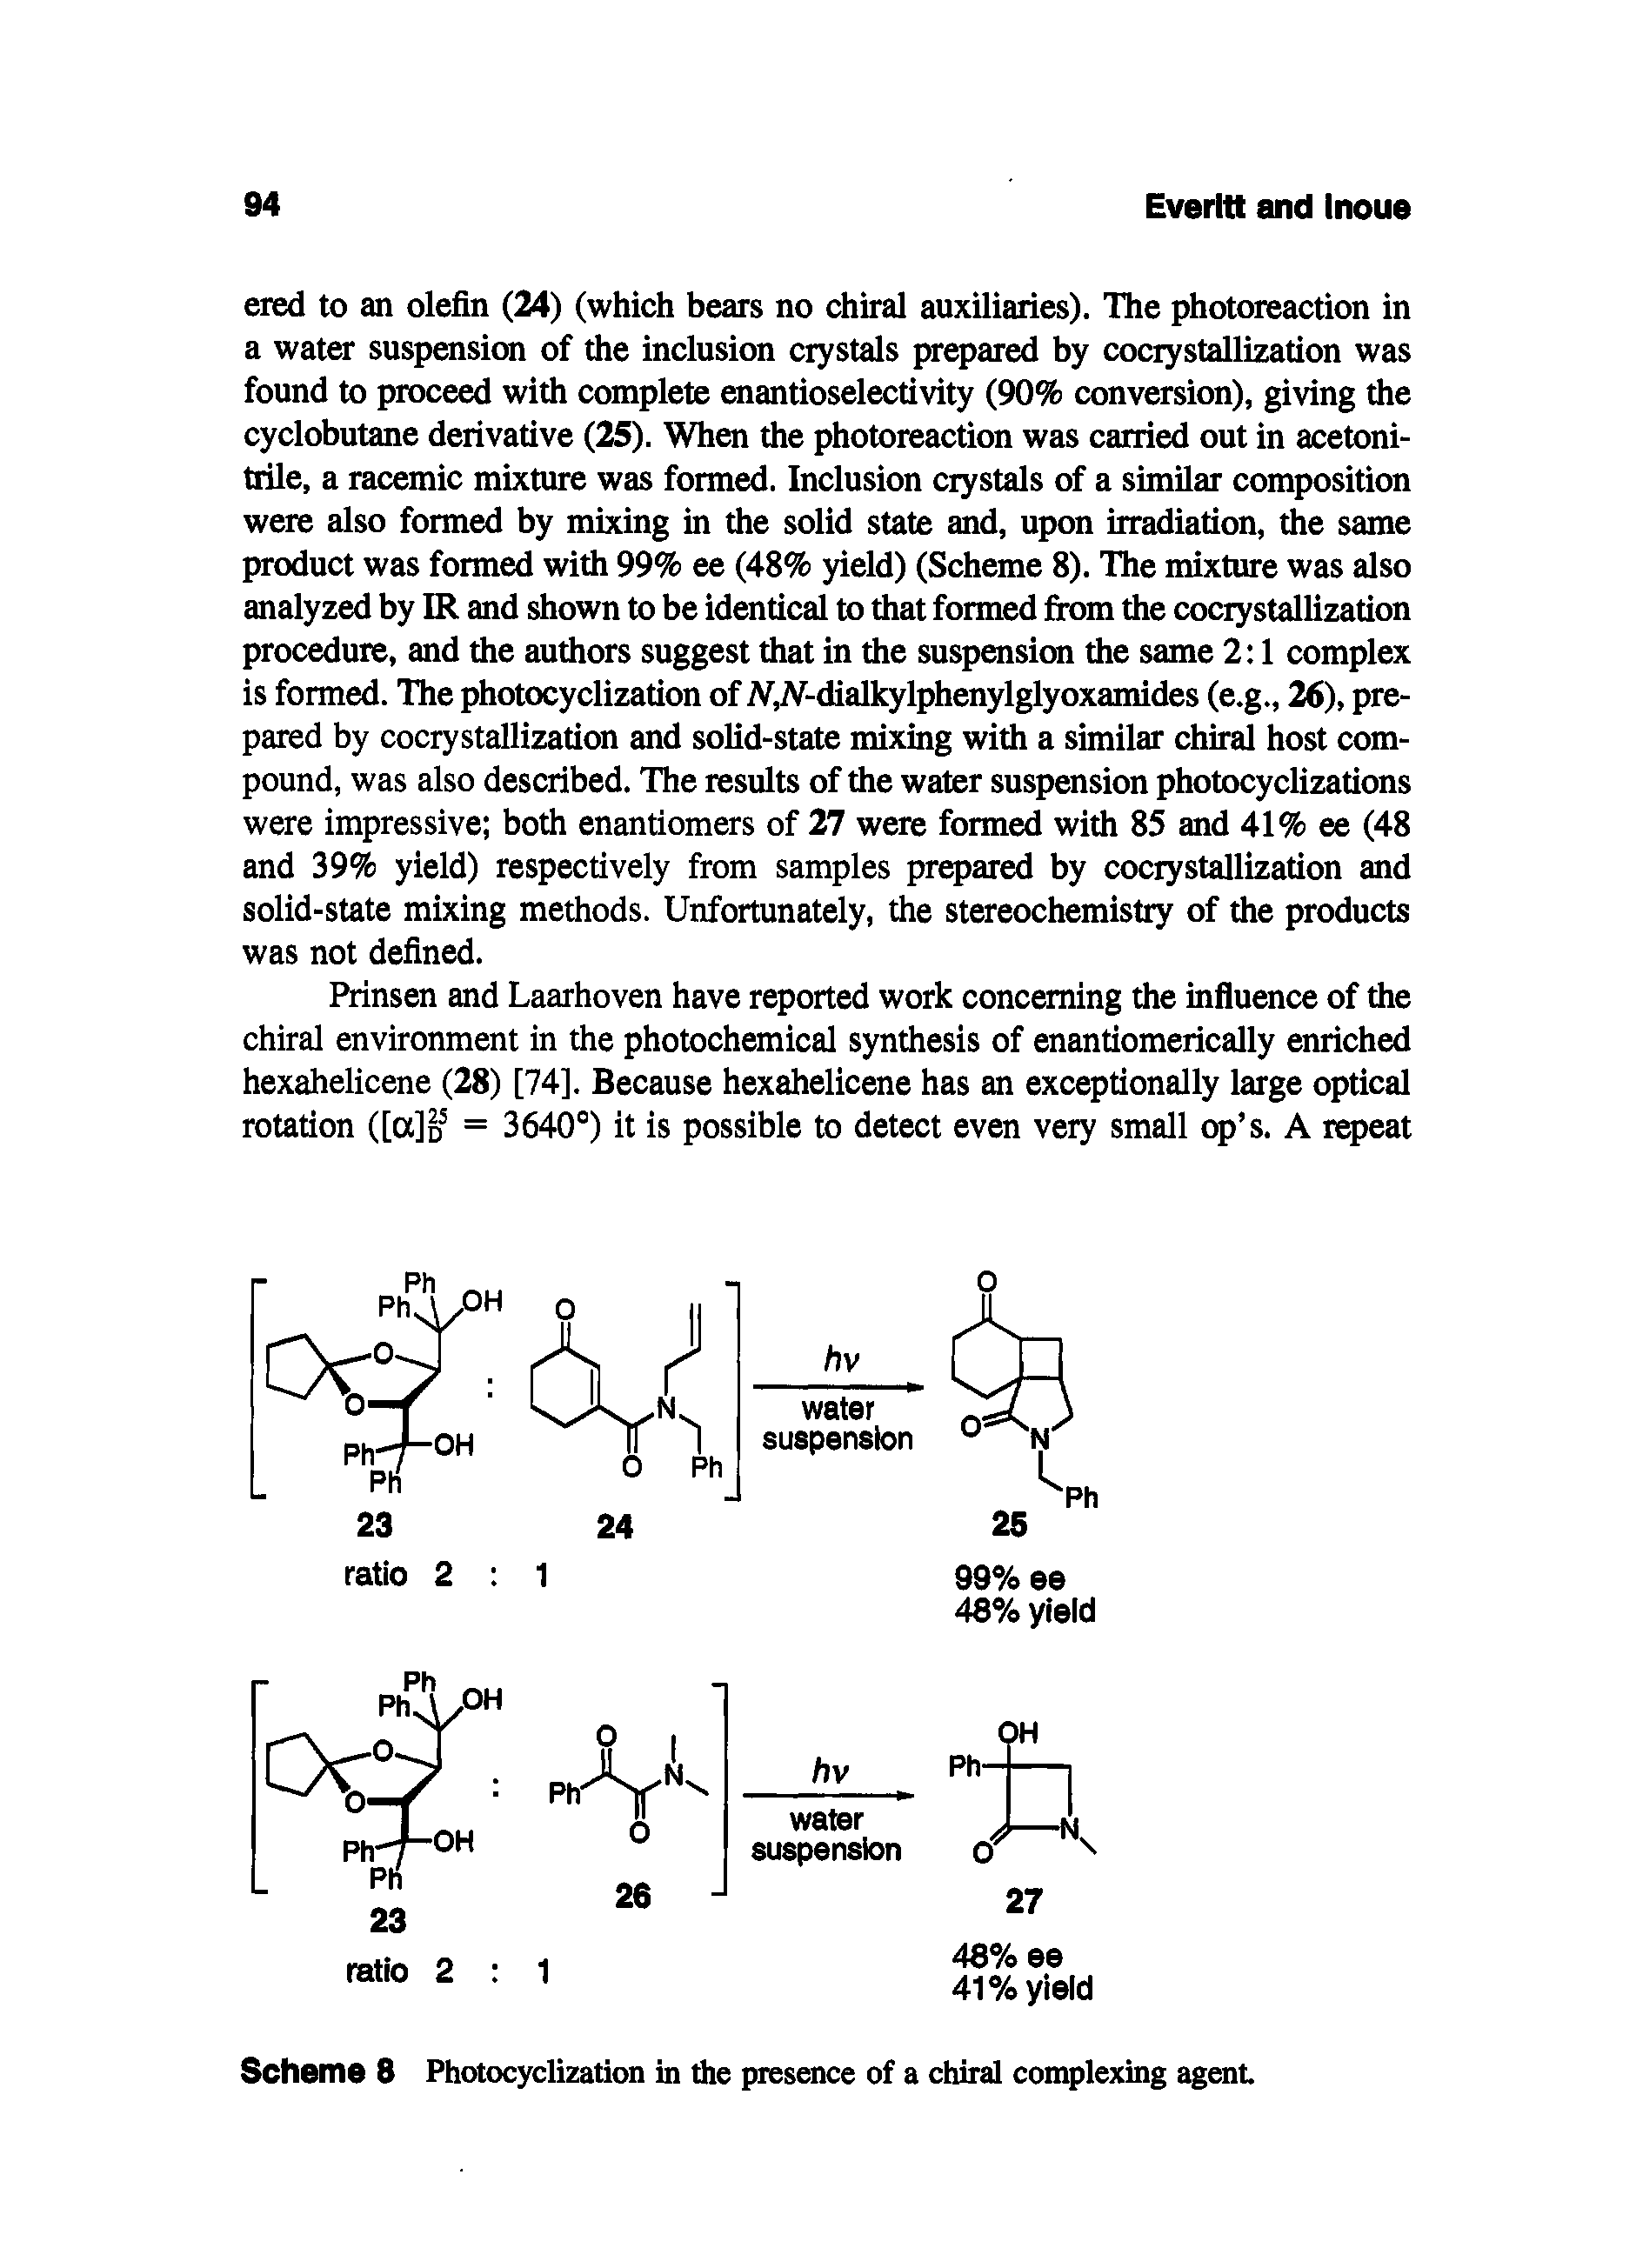 Scheme 8 Photocyclization in the presence of a chiral complexing agent...